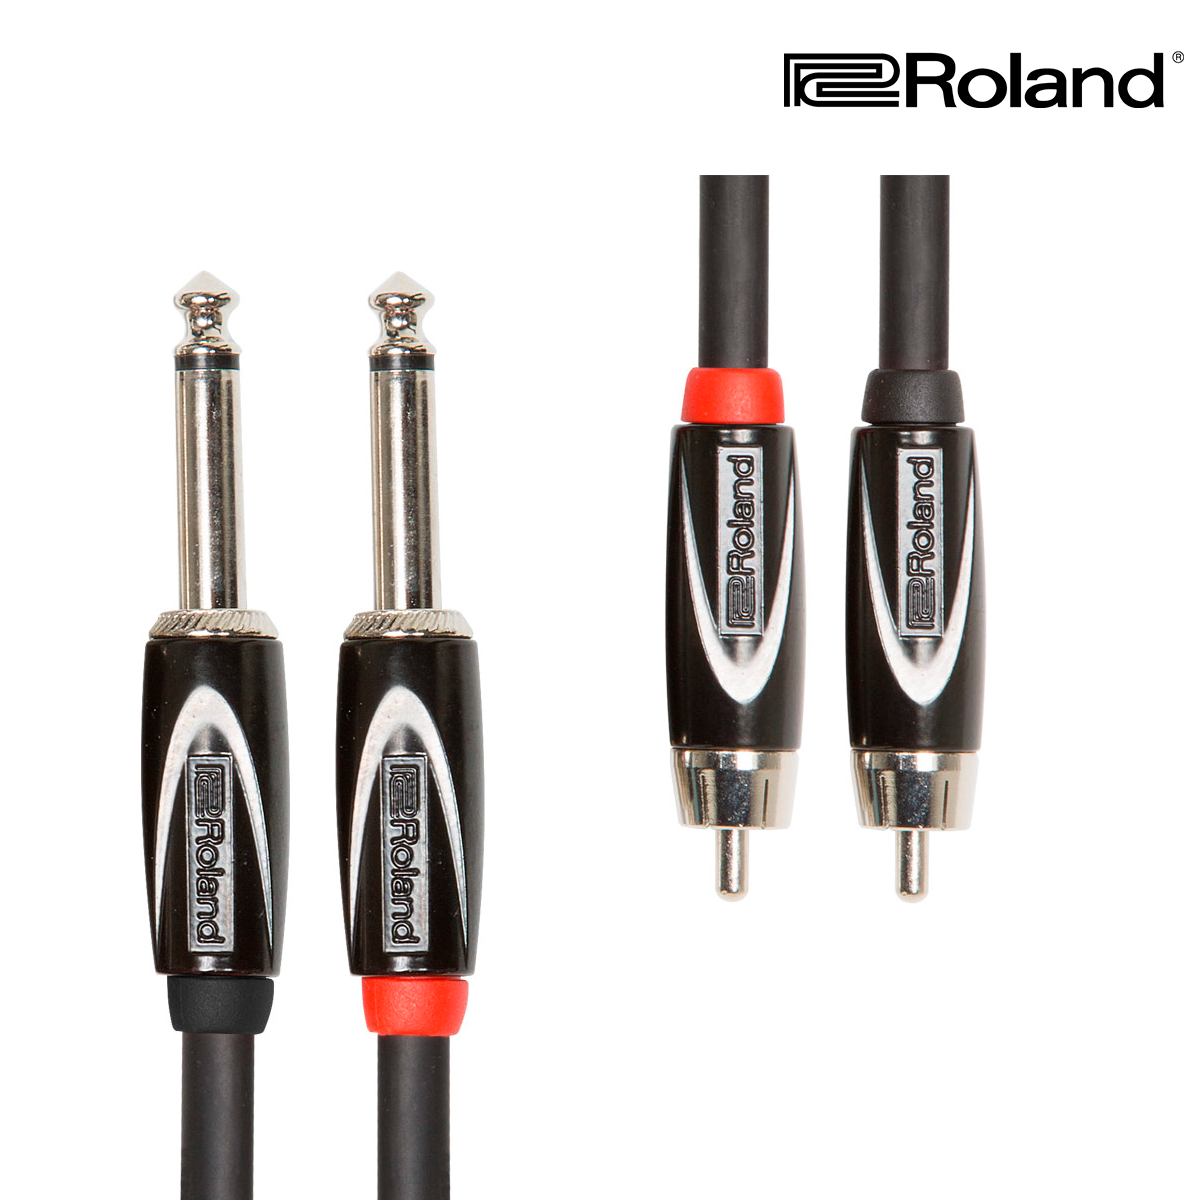 CABLE ROLAND SERIE BLACK (CABLE DOBLE) 2 CONECTORES TR PLUG 6.3MM - 2 CONECTORES RCA 3 MTS. RCC-10-2R28